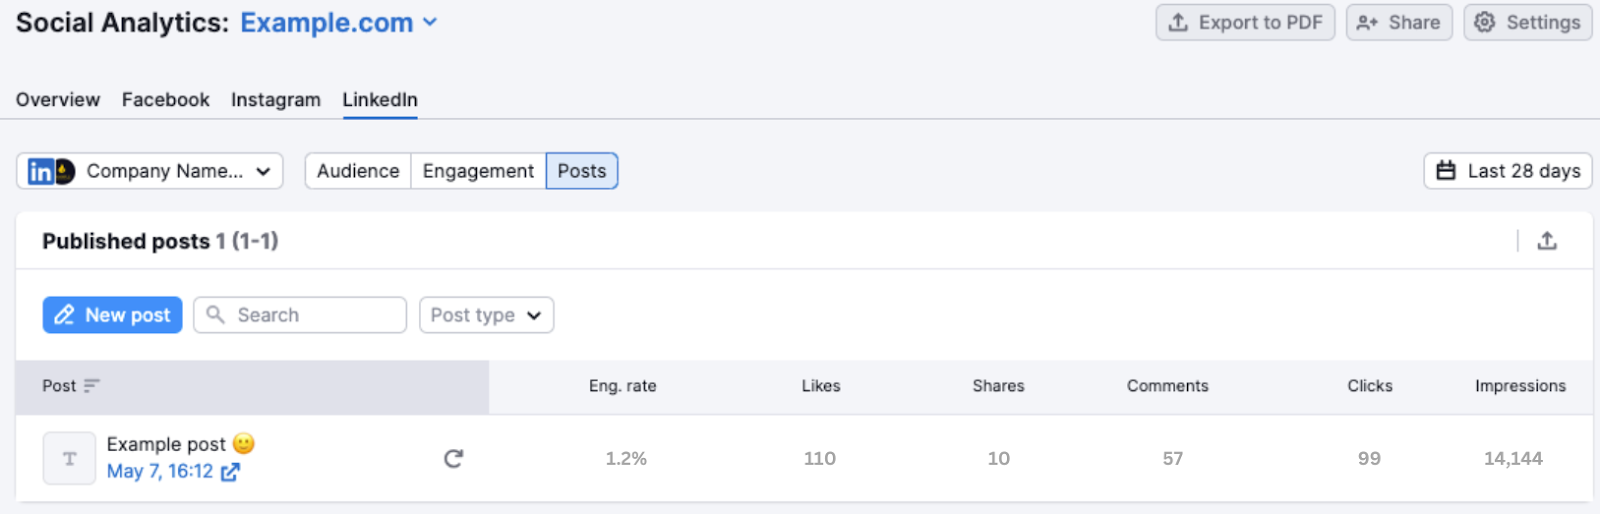 Posts tab of social analytics dashboard highlighted with data for example post